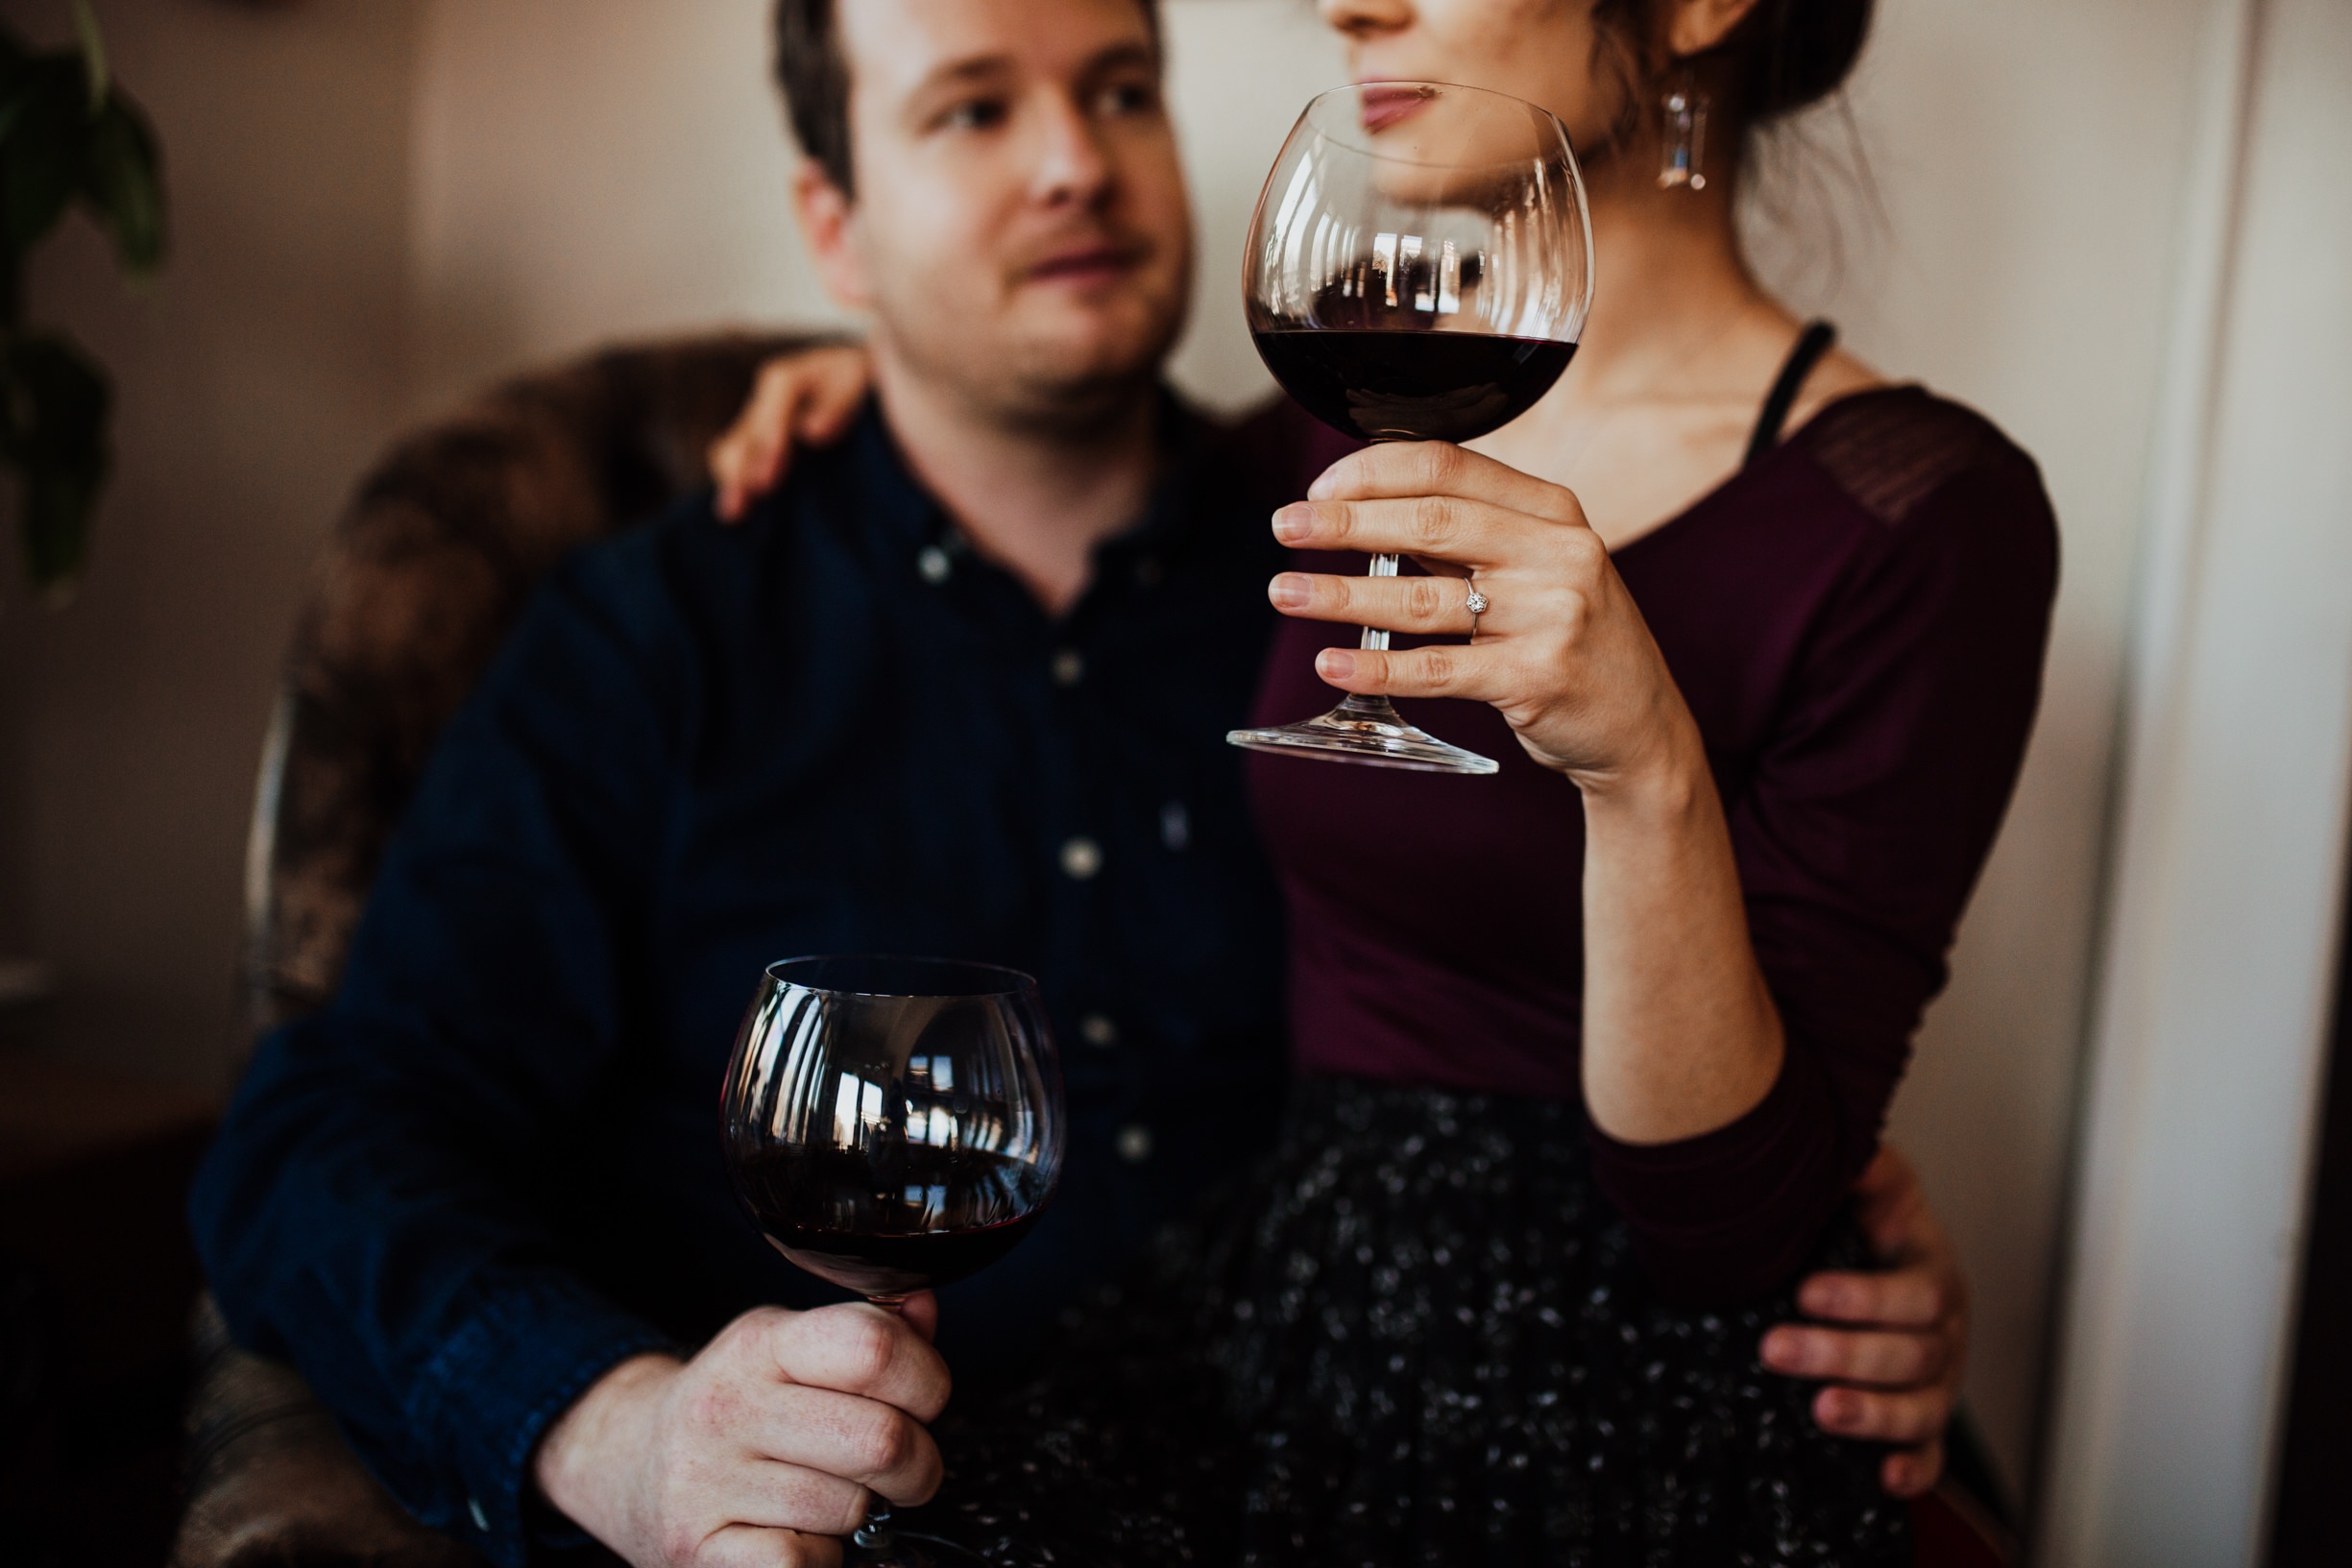 louisville-engagement-photographer-record-store-in-home-session-crystal-ludwick-photo (6 of 53).jpg